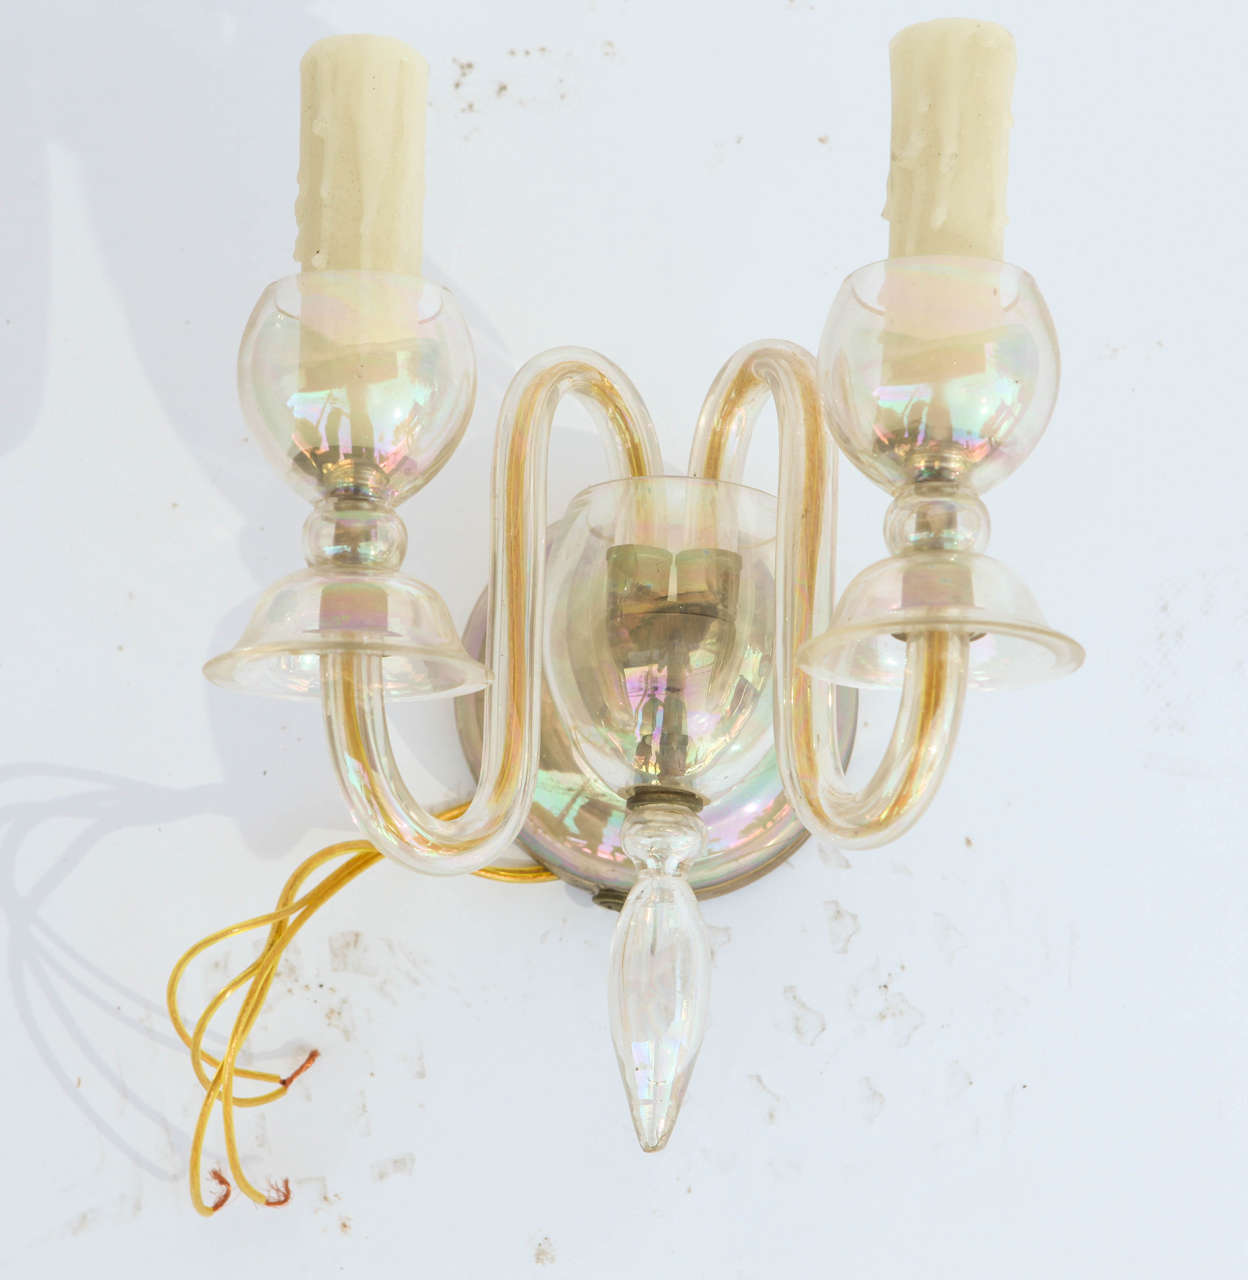 Pair of Vintage Italian Murano Iridescent Sconces.  These Sconces have been newly wired.